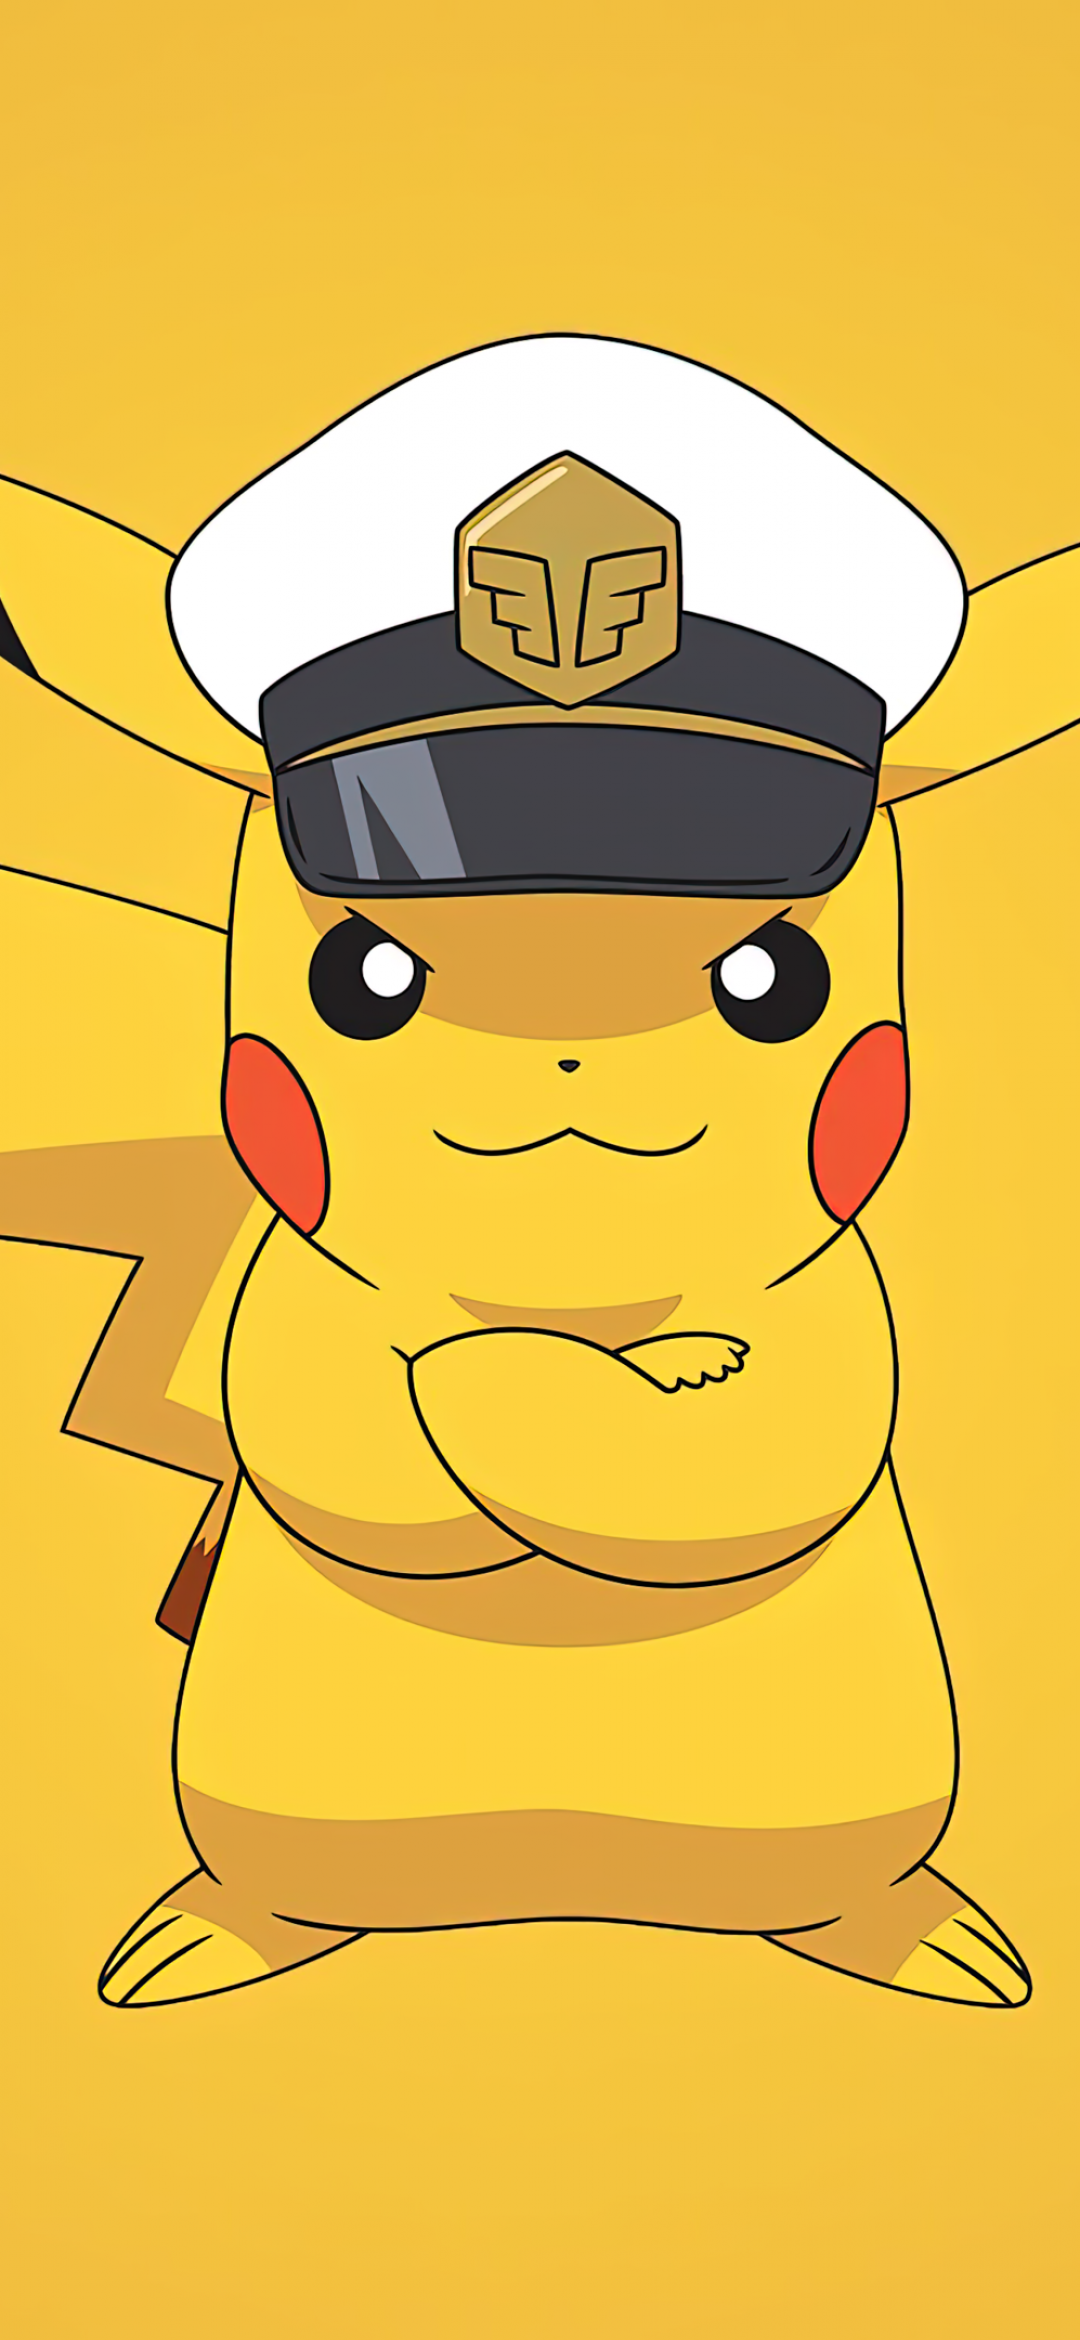 Tap image for more iPhone 6 Plus Pikachu wallpapers Pikachu – mobile9 Cute